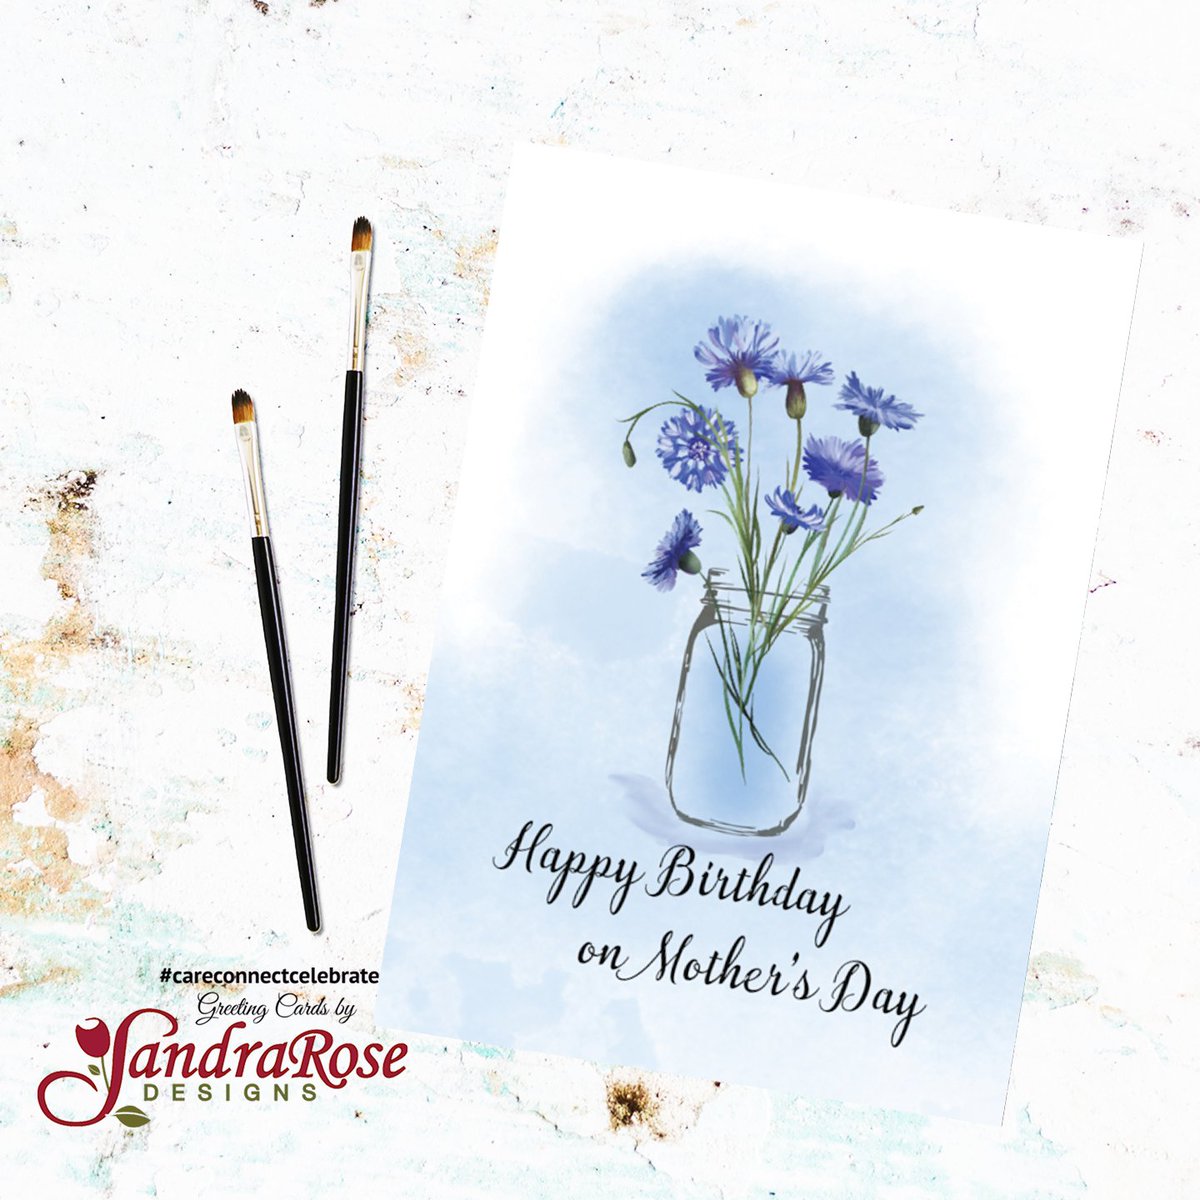 A mother will be celebrating her birthday at the same time Mother’s Day will be celebrated. Greet her with one card for both the holiday and the occasion. #CareConnectCelebrate #SandraRoseDesigns
@GCUniverse #Greetingcards #Greetingcard greetingcarduniverse.com/holiday-birthd…